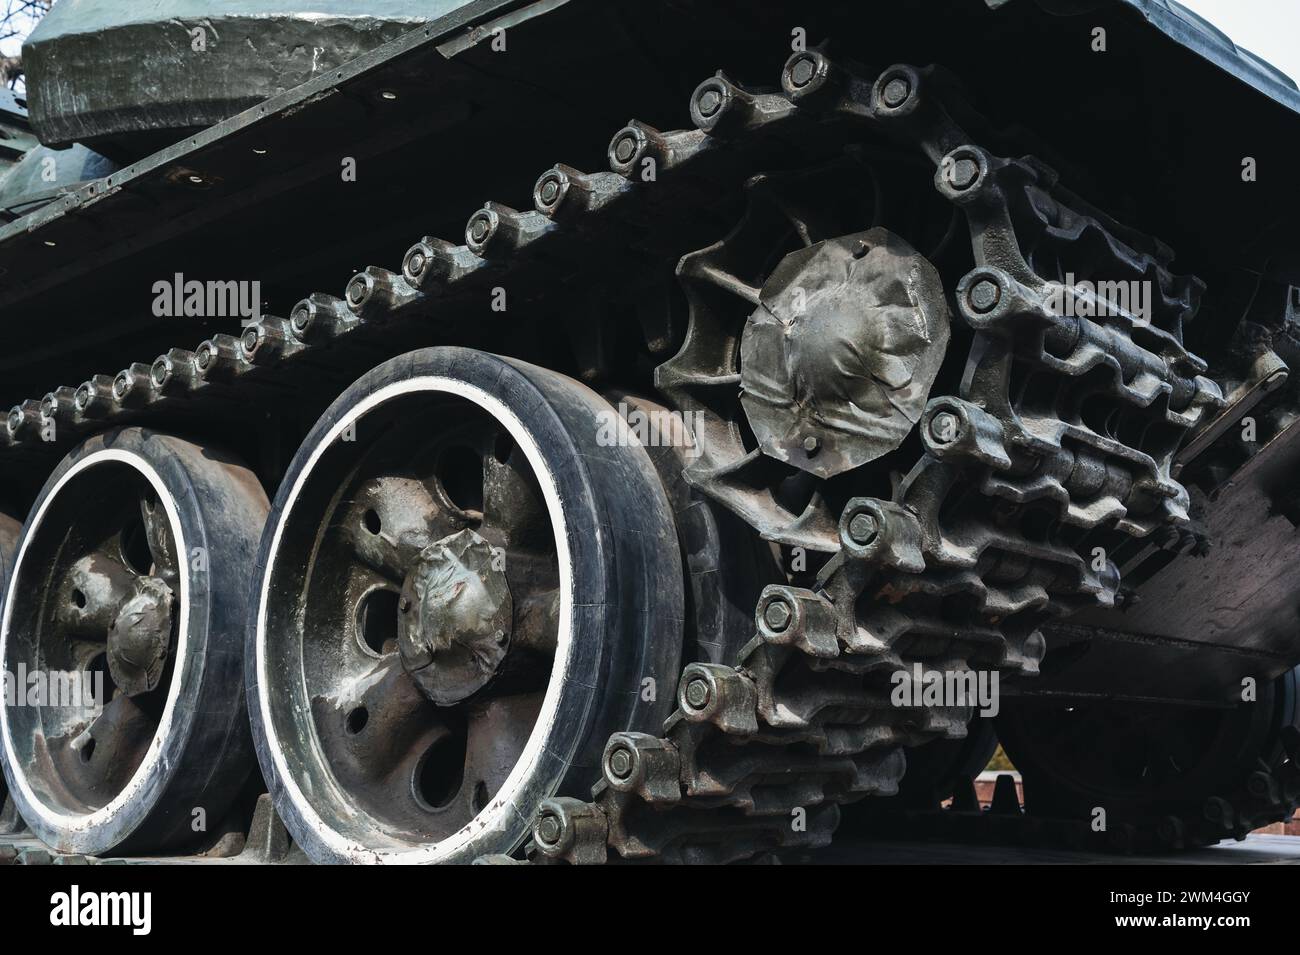 metal caterpillar track of an old Soviet military tank in close-up Stock Photo